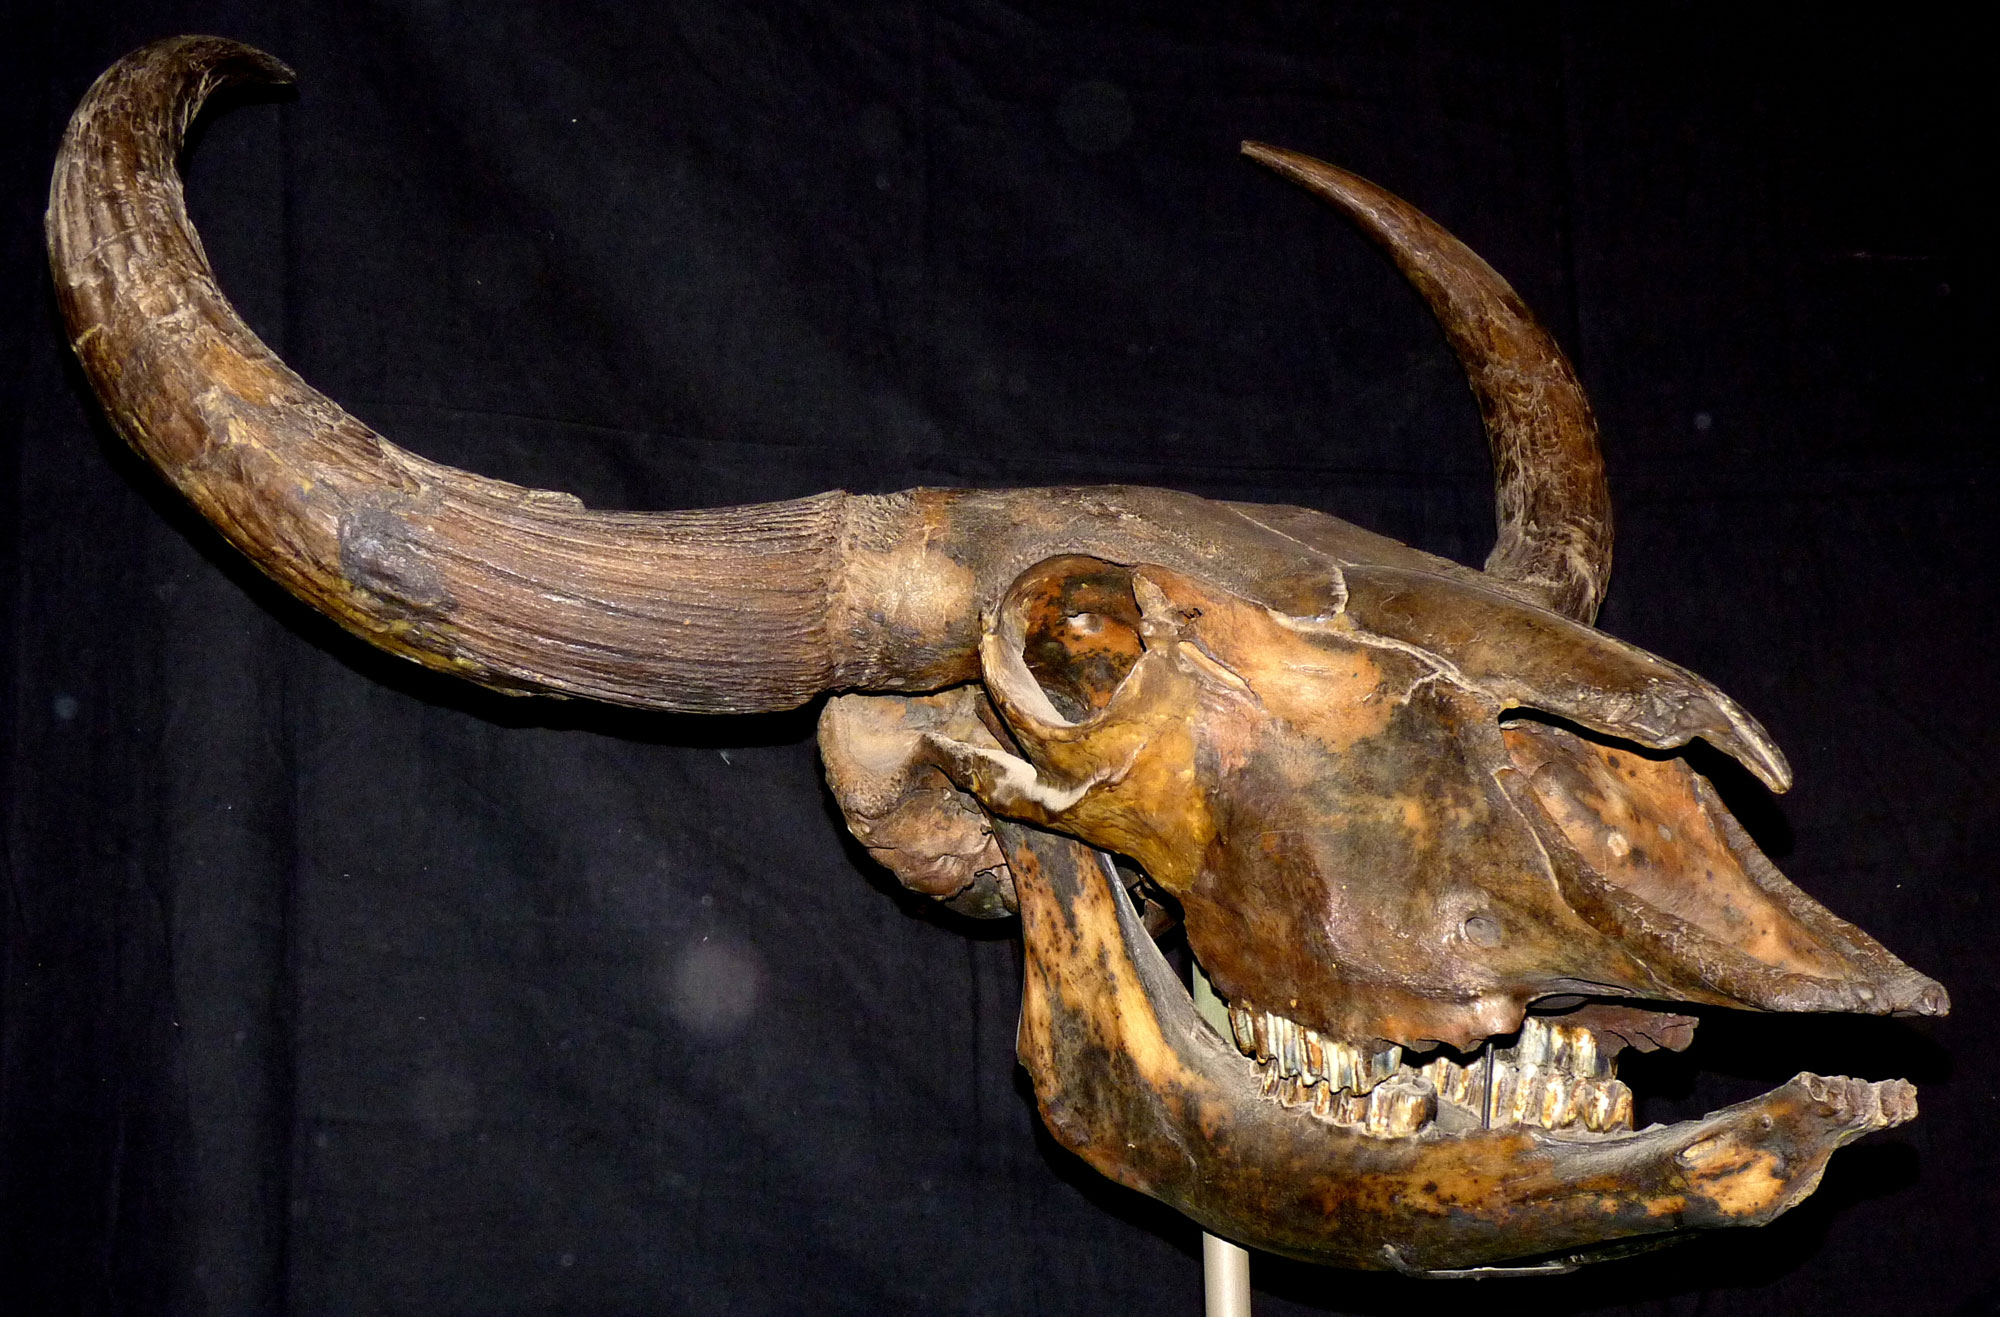 Photograph of the skull of a steppe bison the Pleistocene of Alaska against a black backdrop. The skull is dark brown and has large horns that curve outward and then upward. 